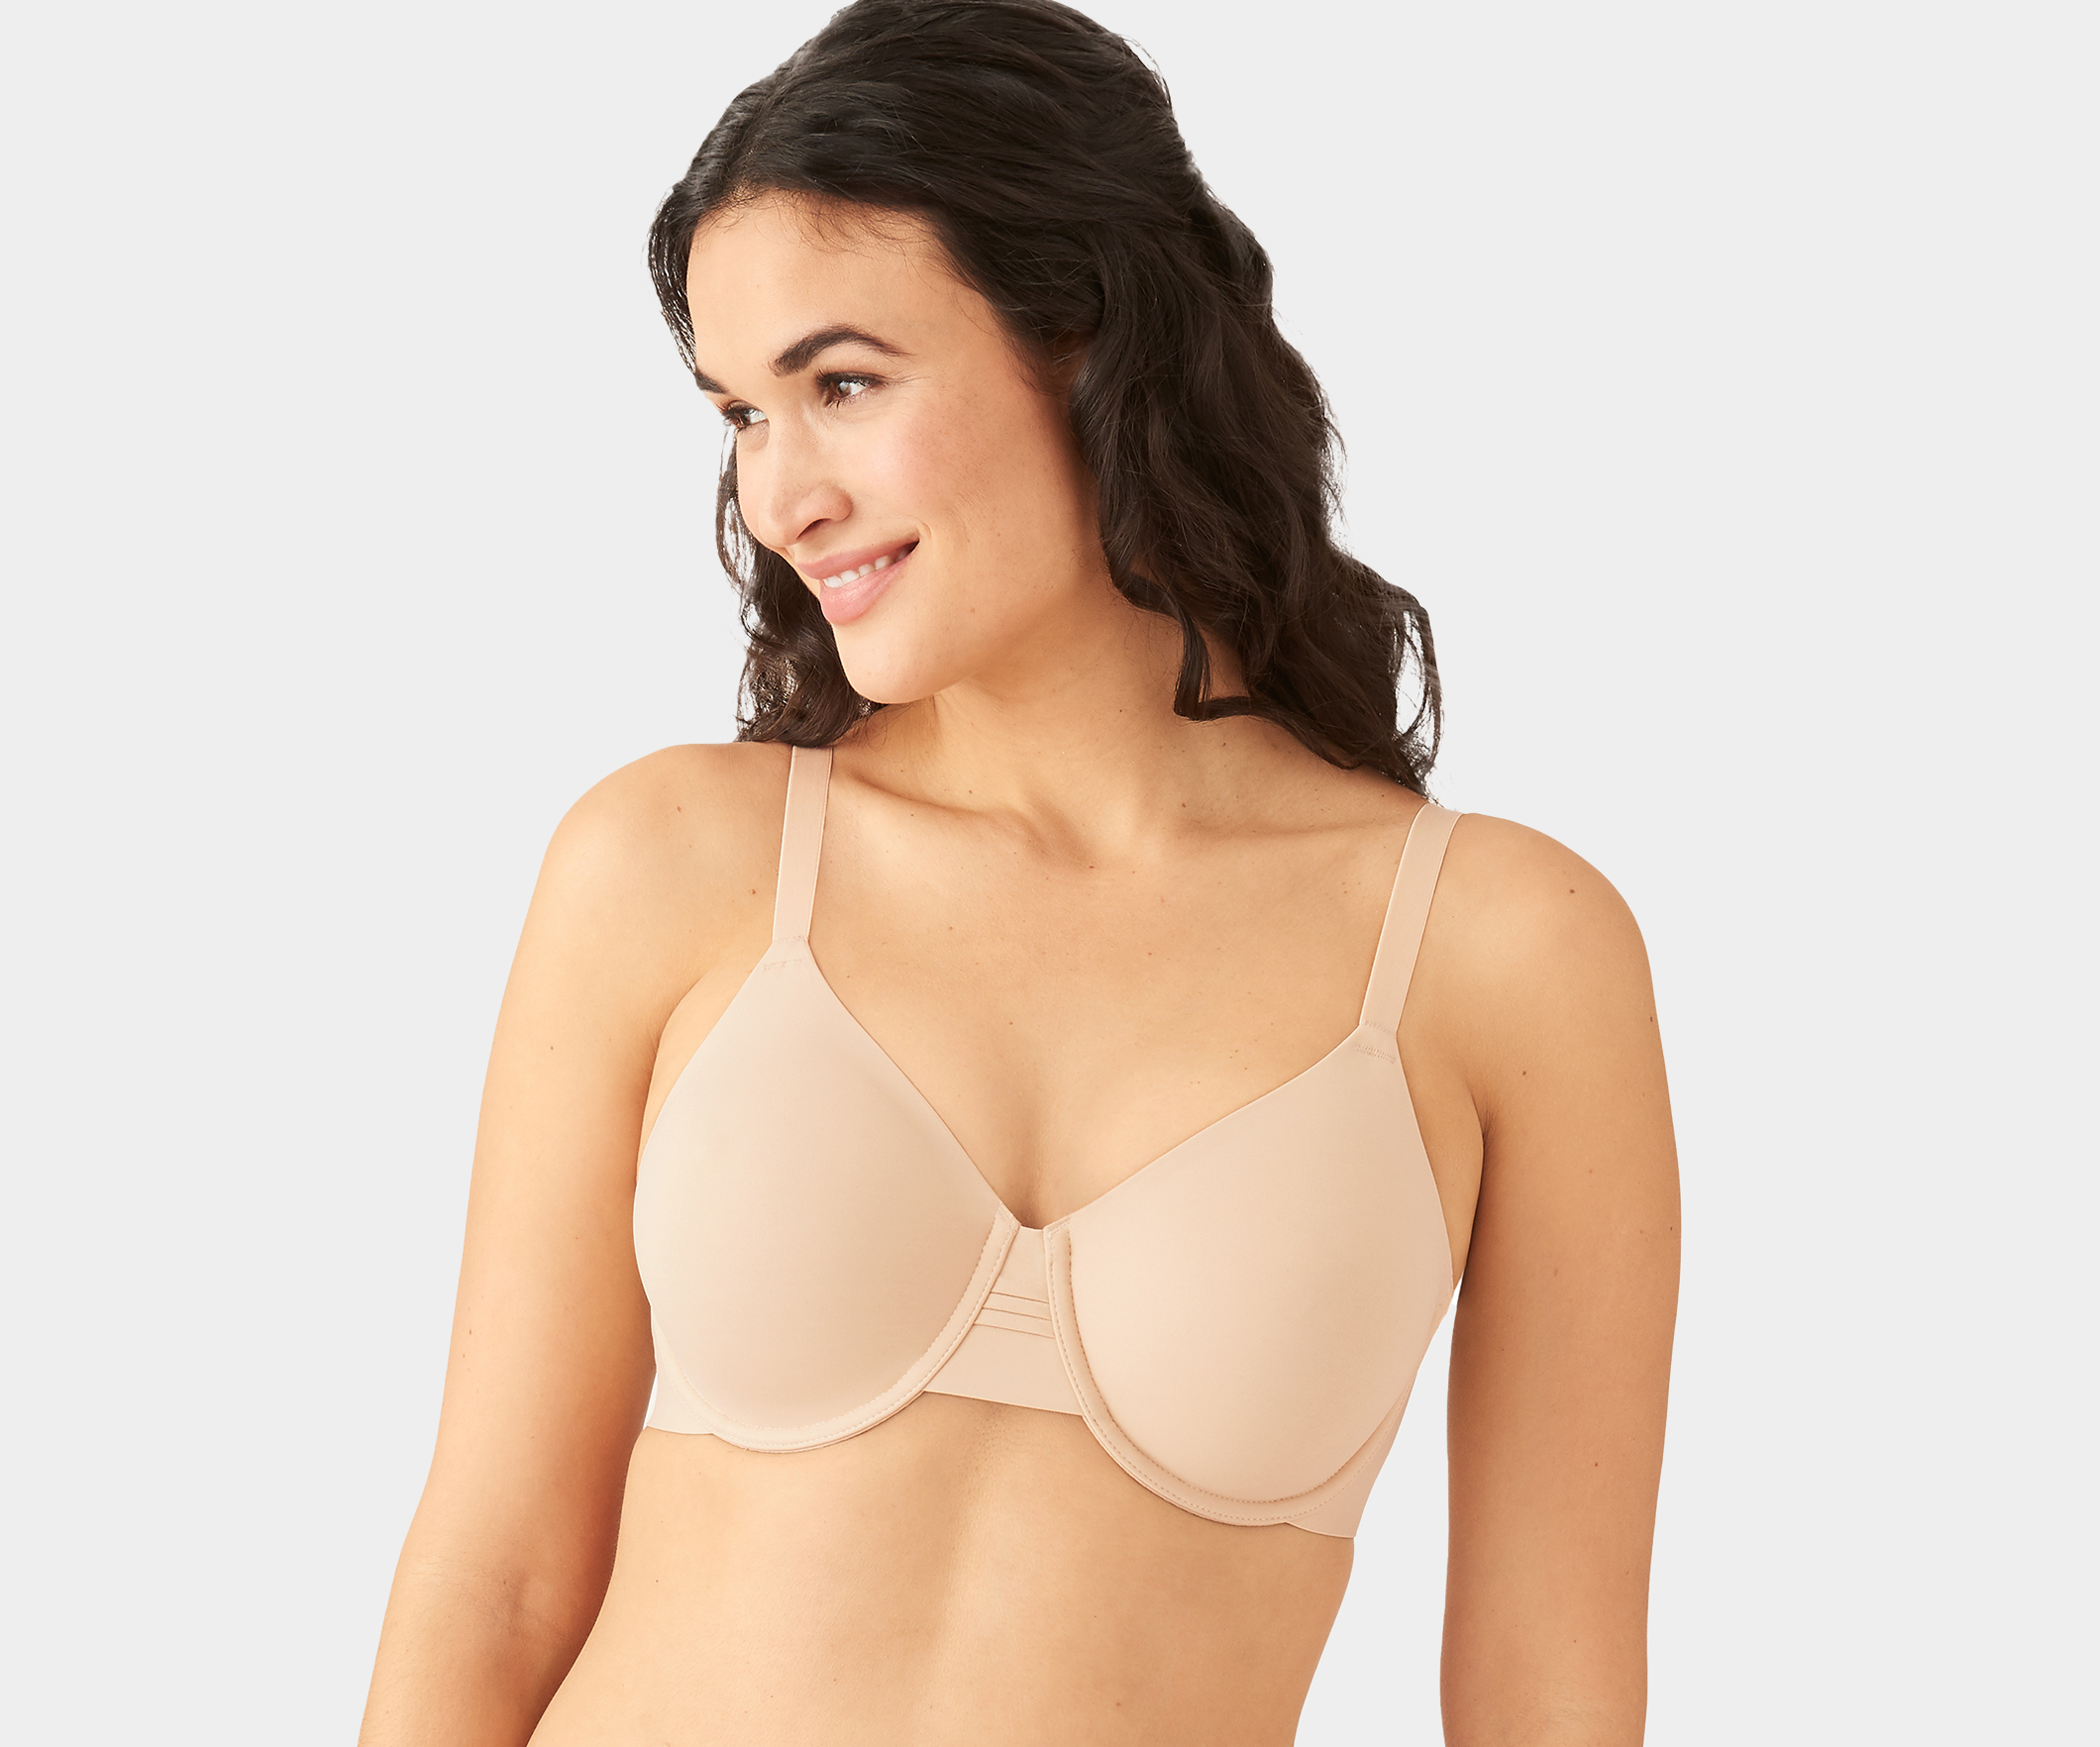 Bras 101: Cup Coverage Levels Explained by Wacoal - Wacoal